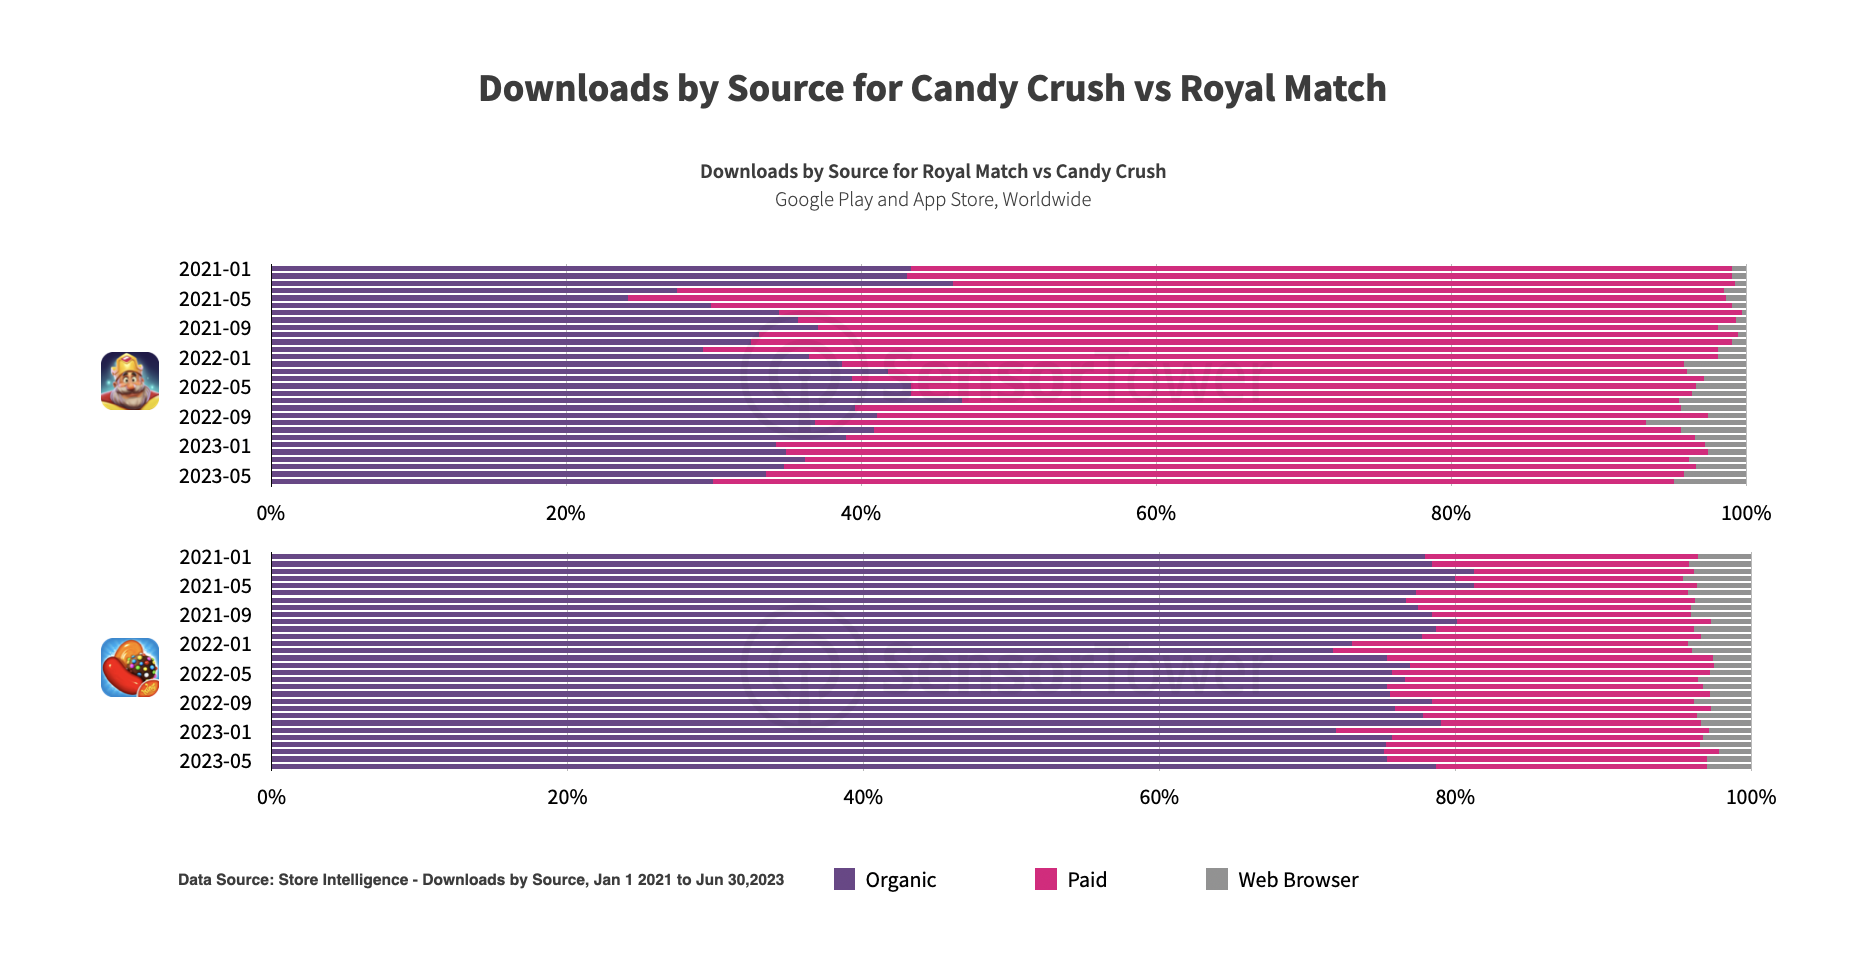 Downloads by source for Candy Crush vs Royal Match